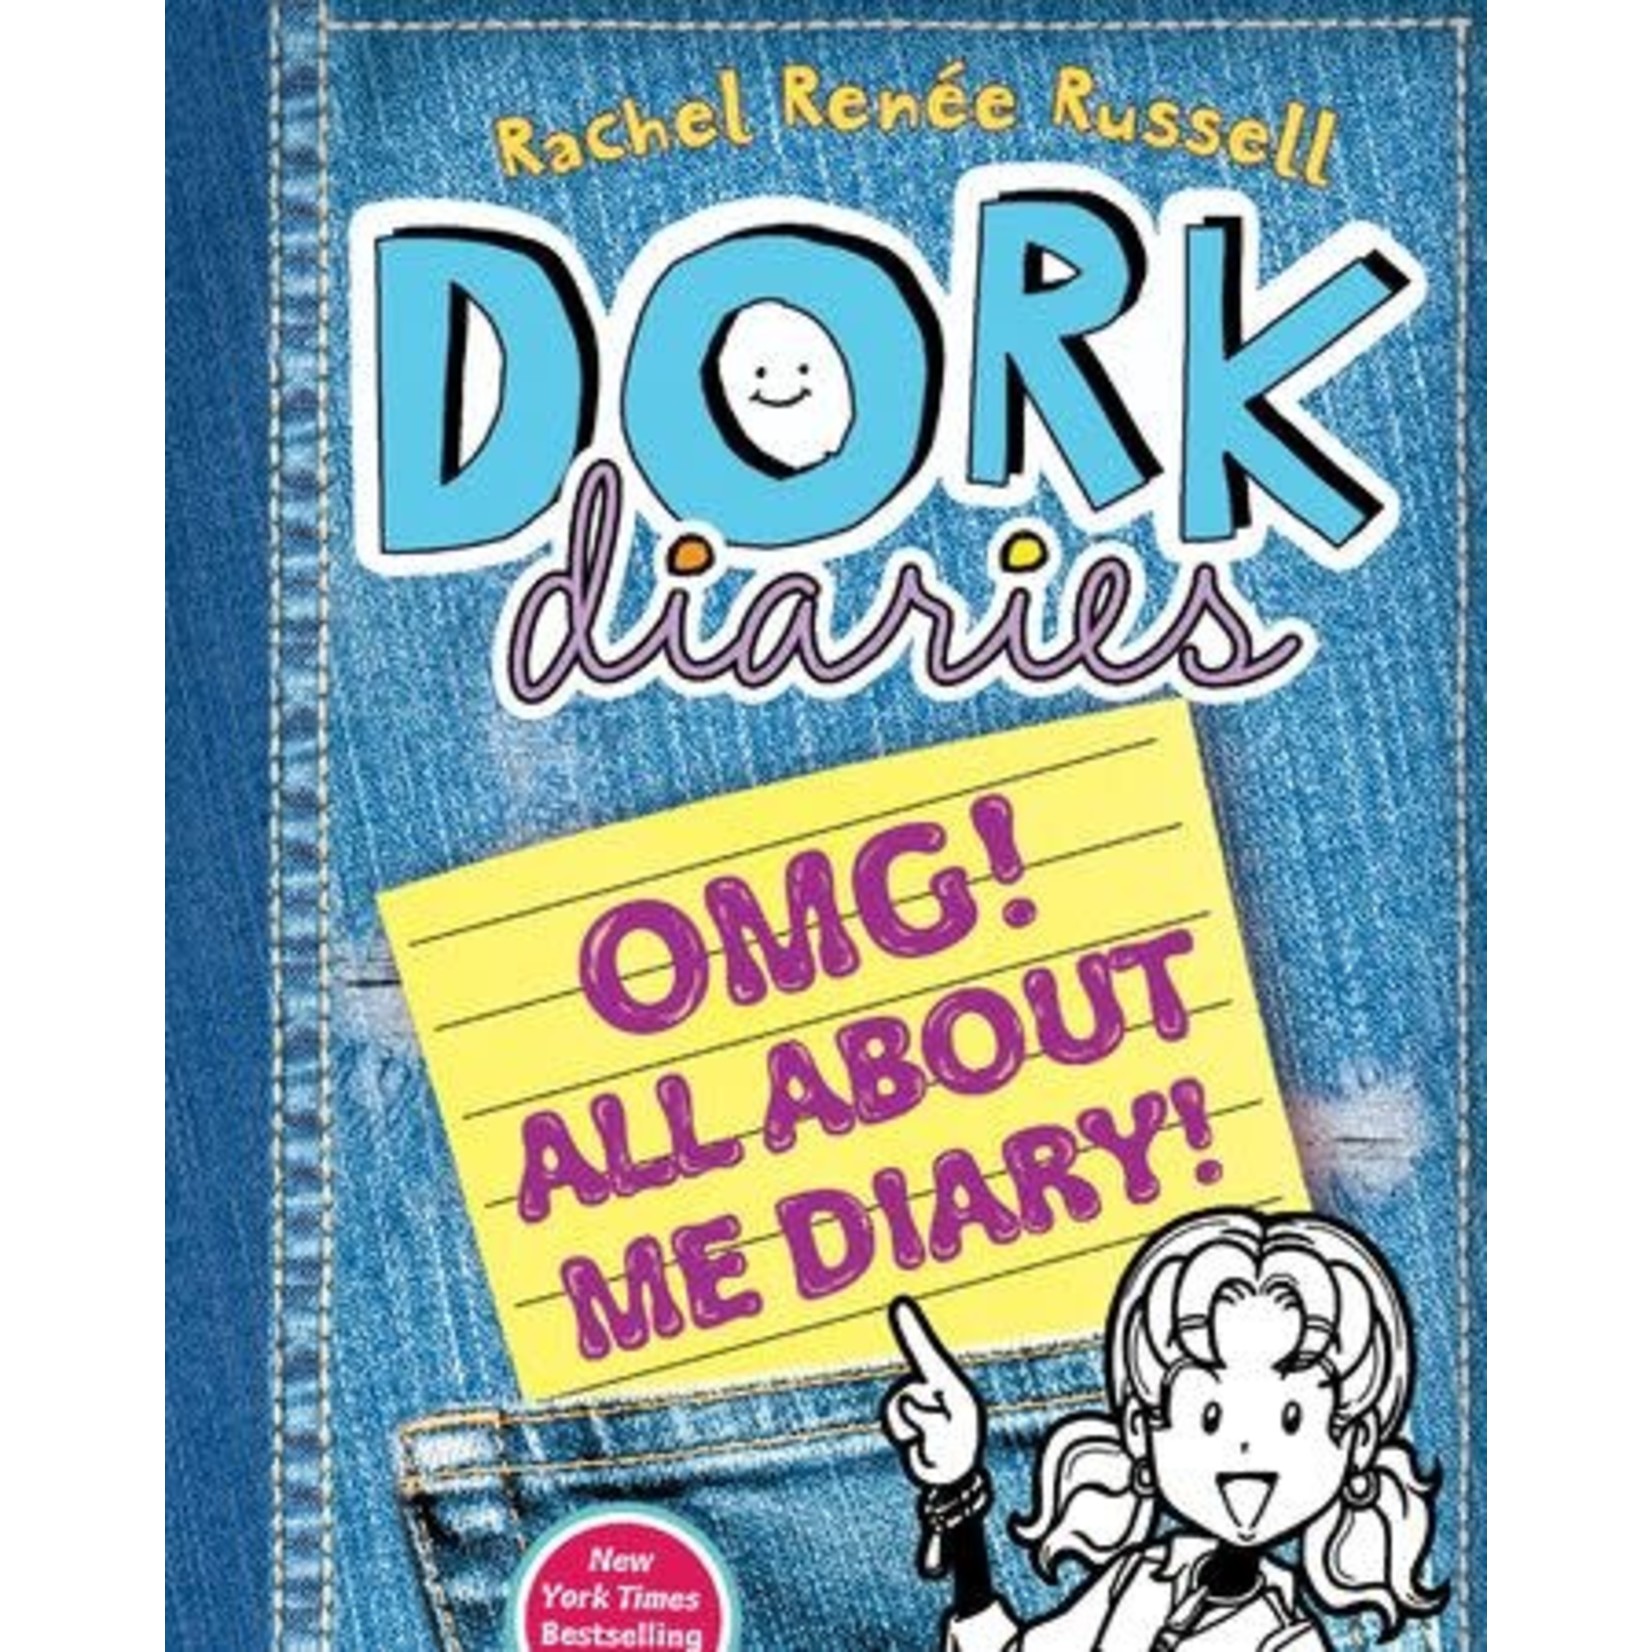 Rachel Renee Russell * BRAND NEW* Dork Diaries - OMG! All About Me Diary!